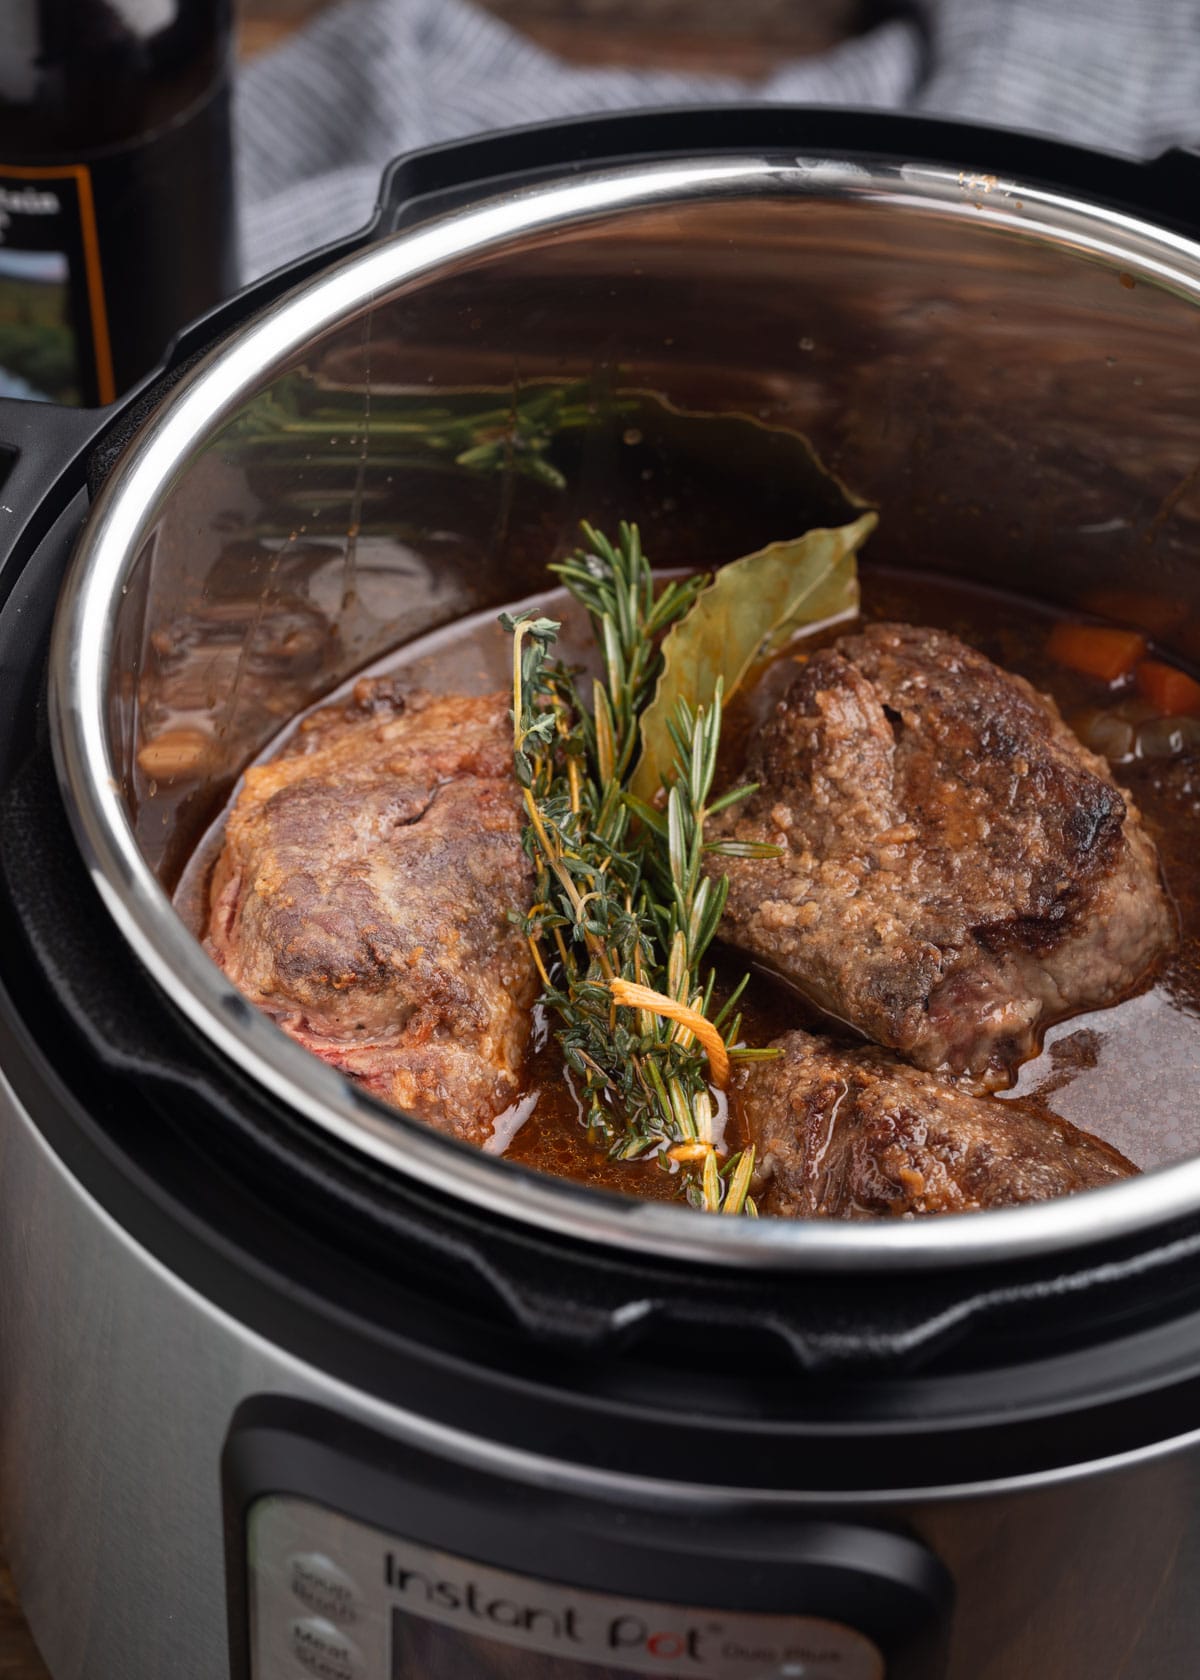 seared short ribs with stout braising liquid in an electric pressure cooker